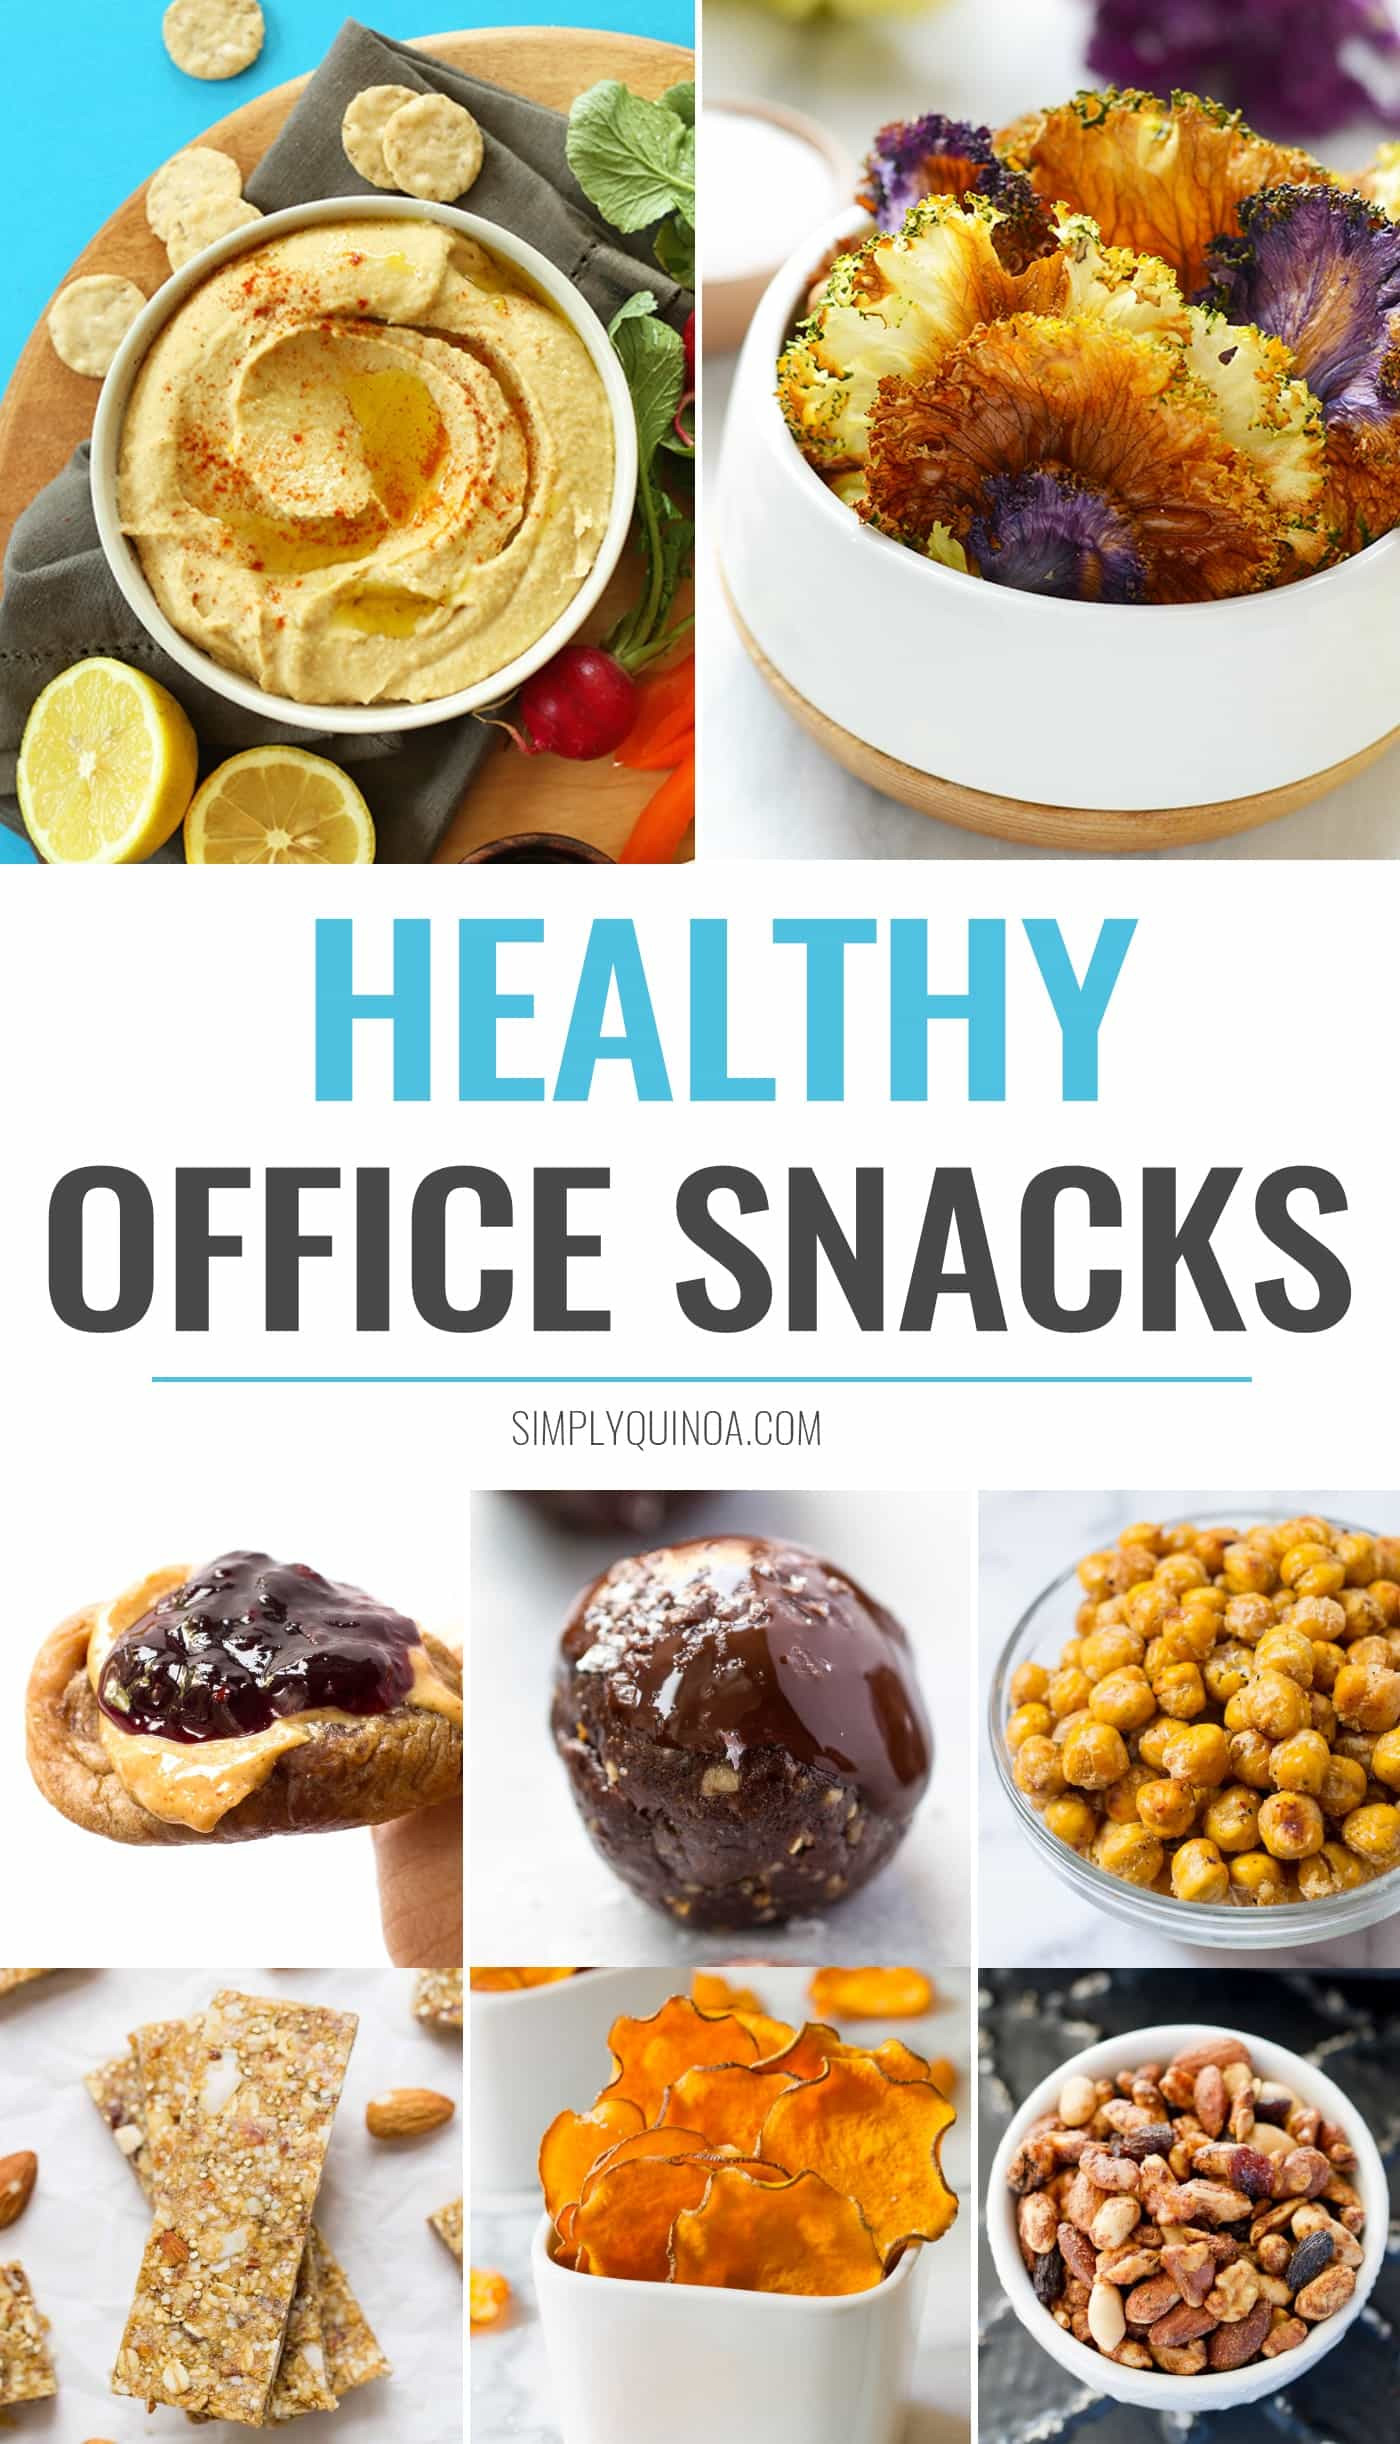 Top Healthy Snacks
 The 50 Best Healthy fice Snacks The Planet Simply